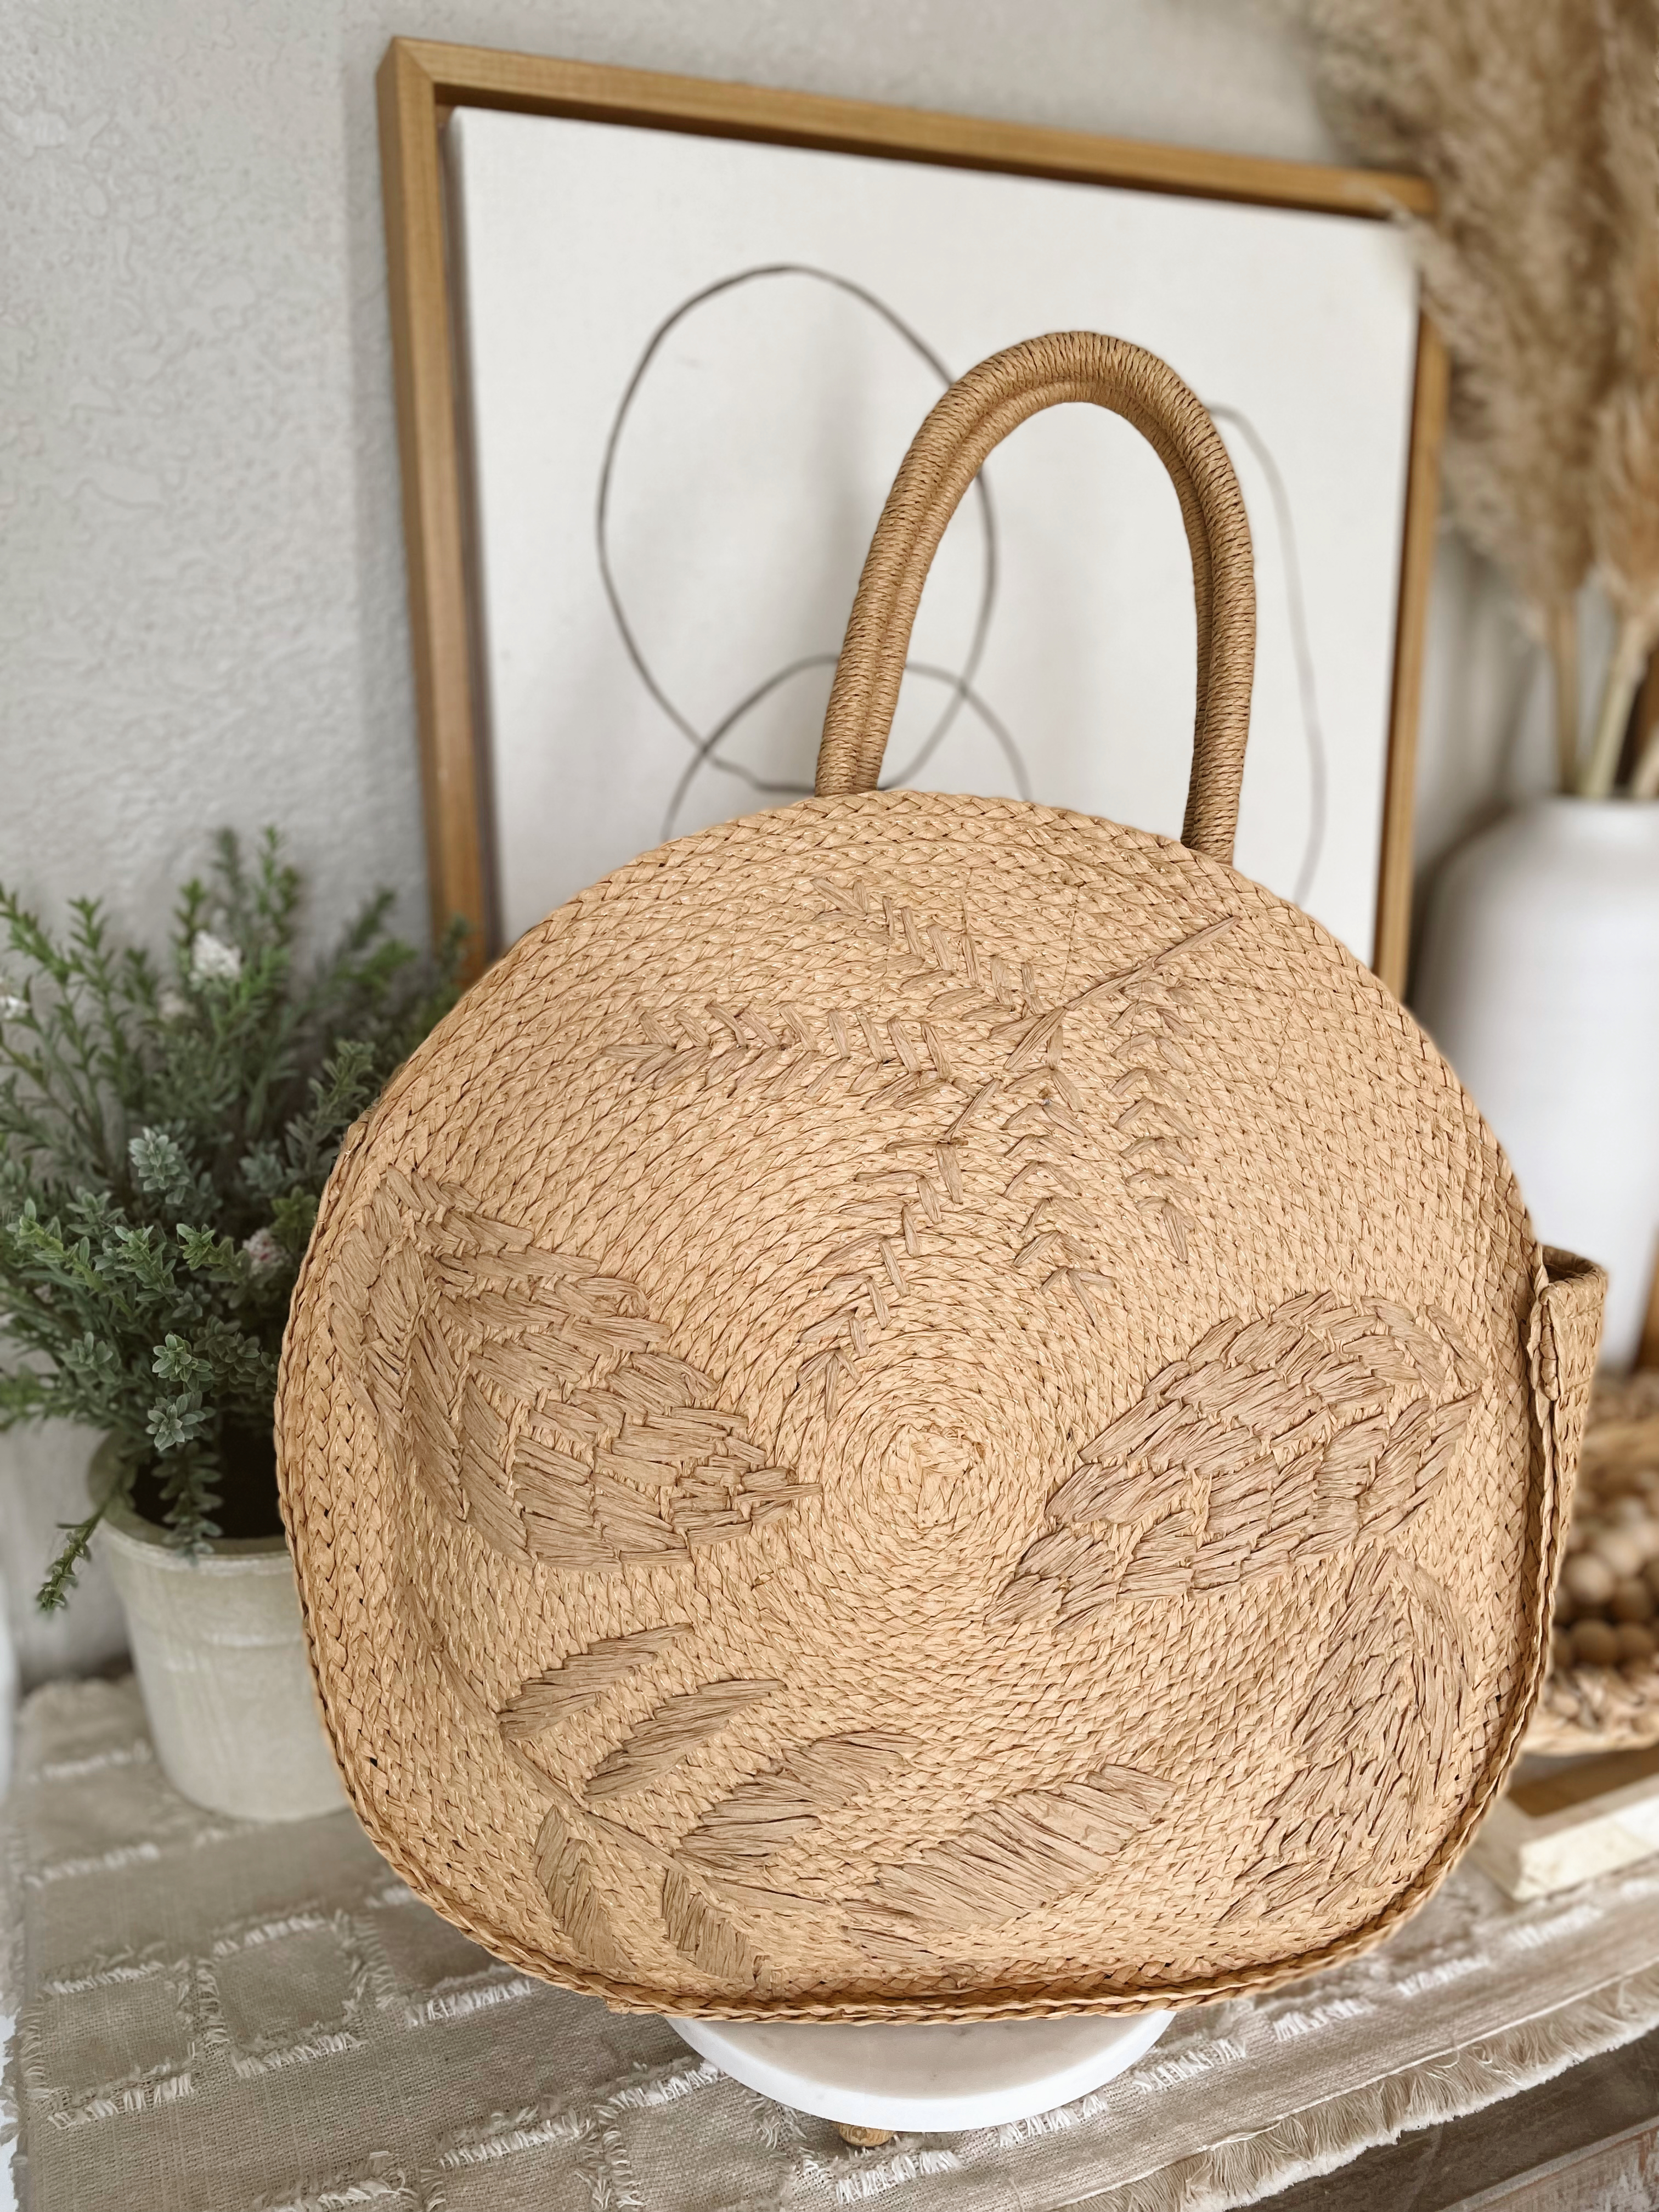 Time and Tru Women’s Circle Straw Tote Bag Natural Embroidery